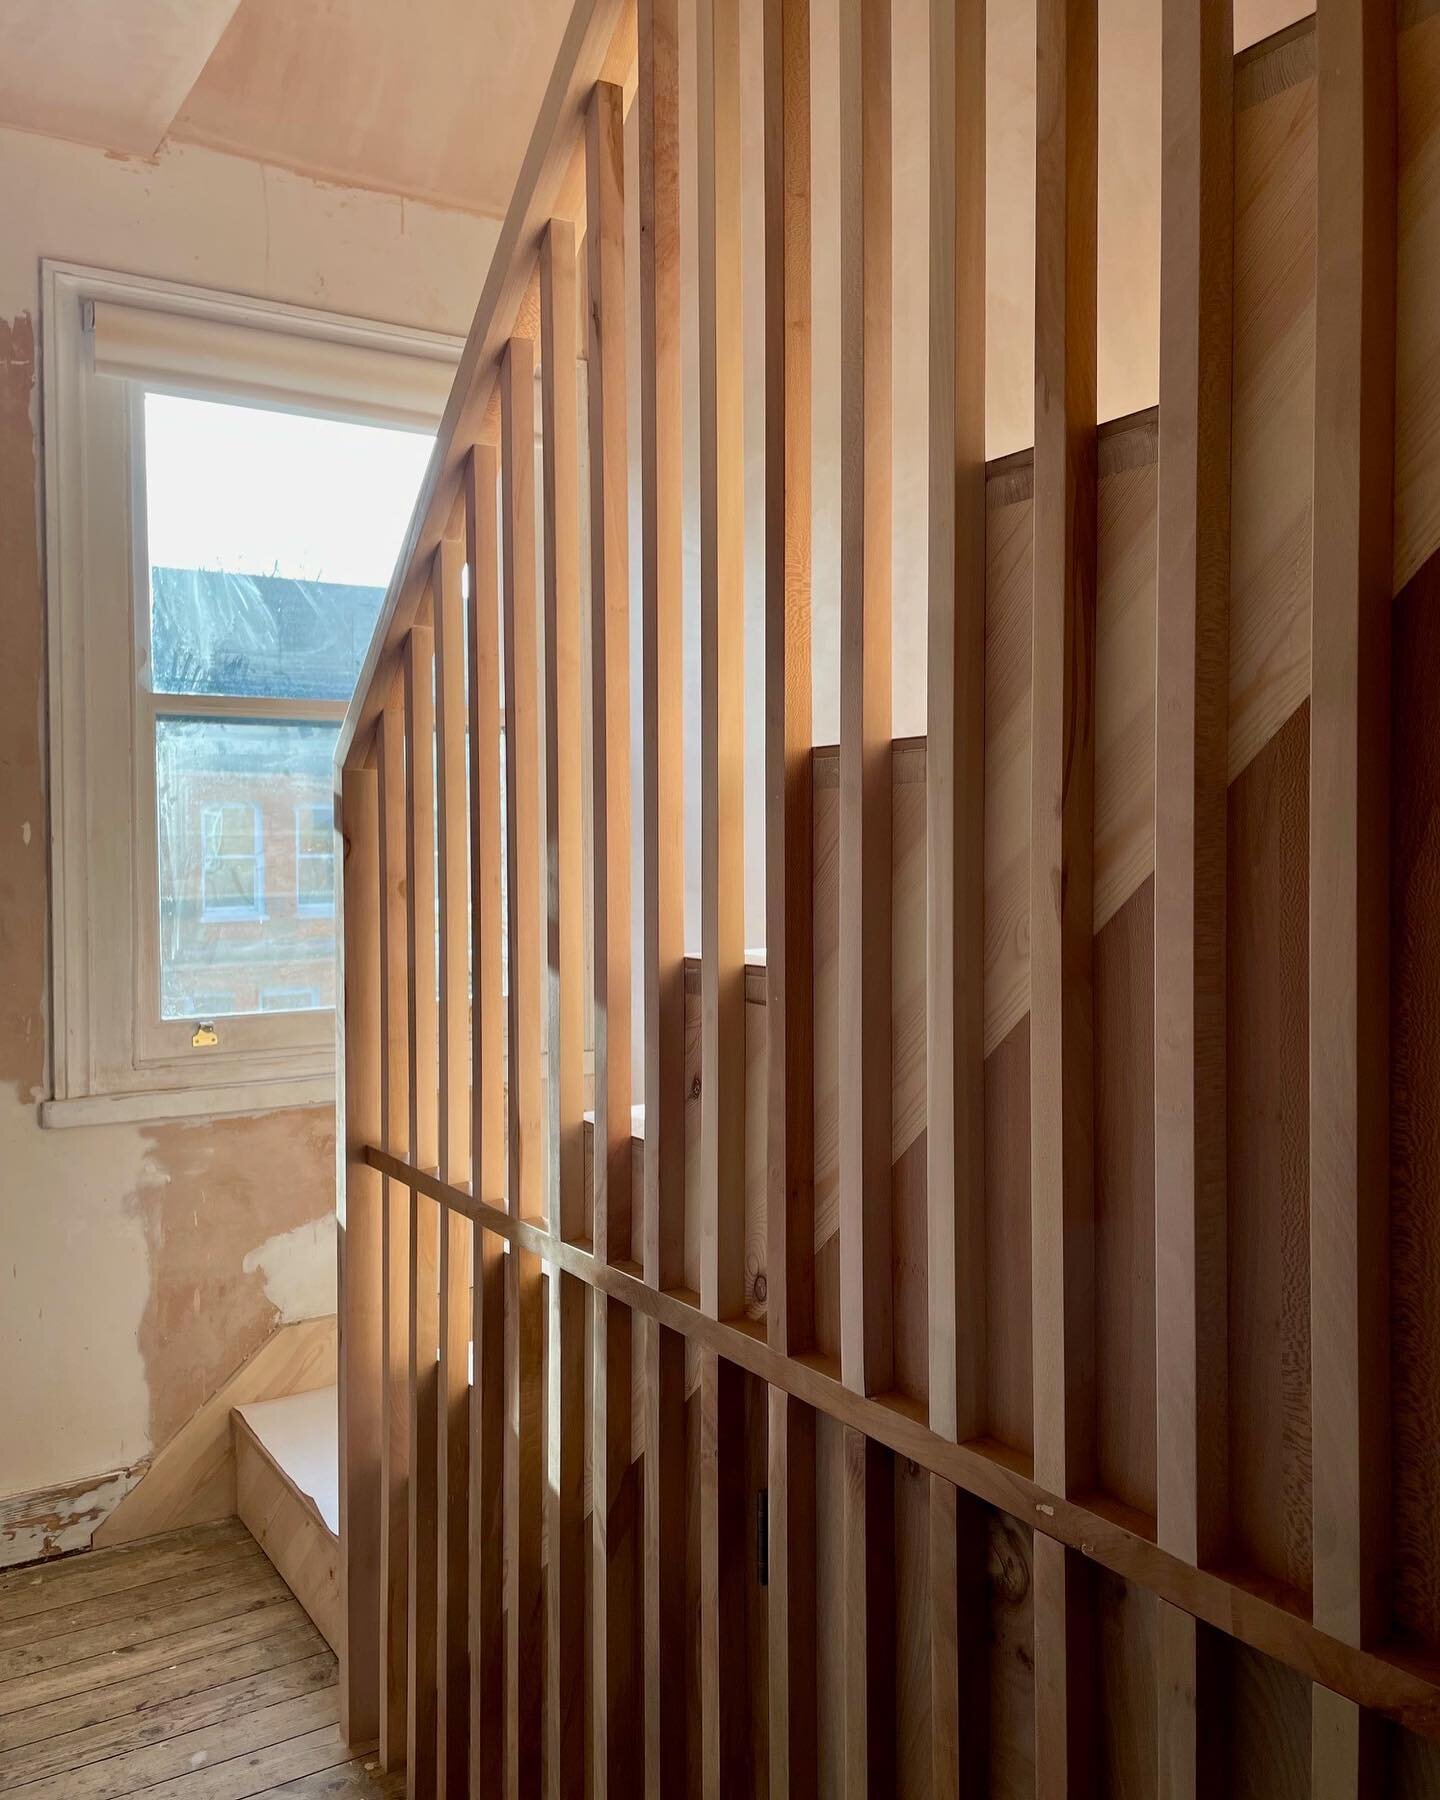 Work to this Warner House in Walthamstow is nearing completion, and the staircase, made from beautiful @fallenandfelled timbers is in place 🪜 we used a combination of London Plane, Beech and Elm, which vary in hues of white, pink, yellow and orange,